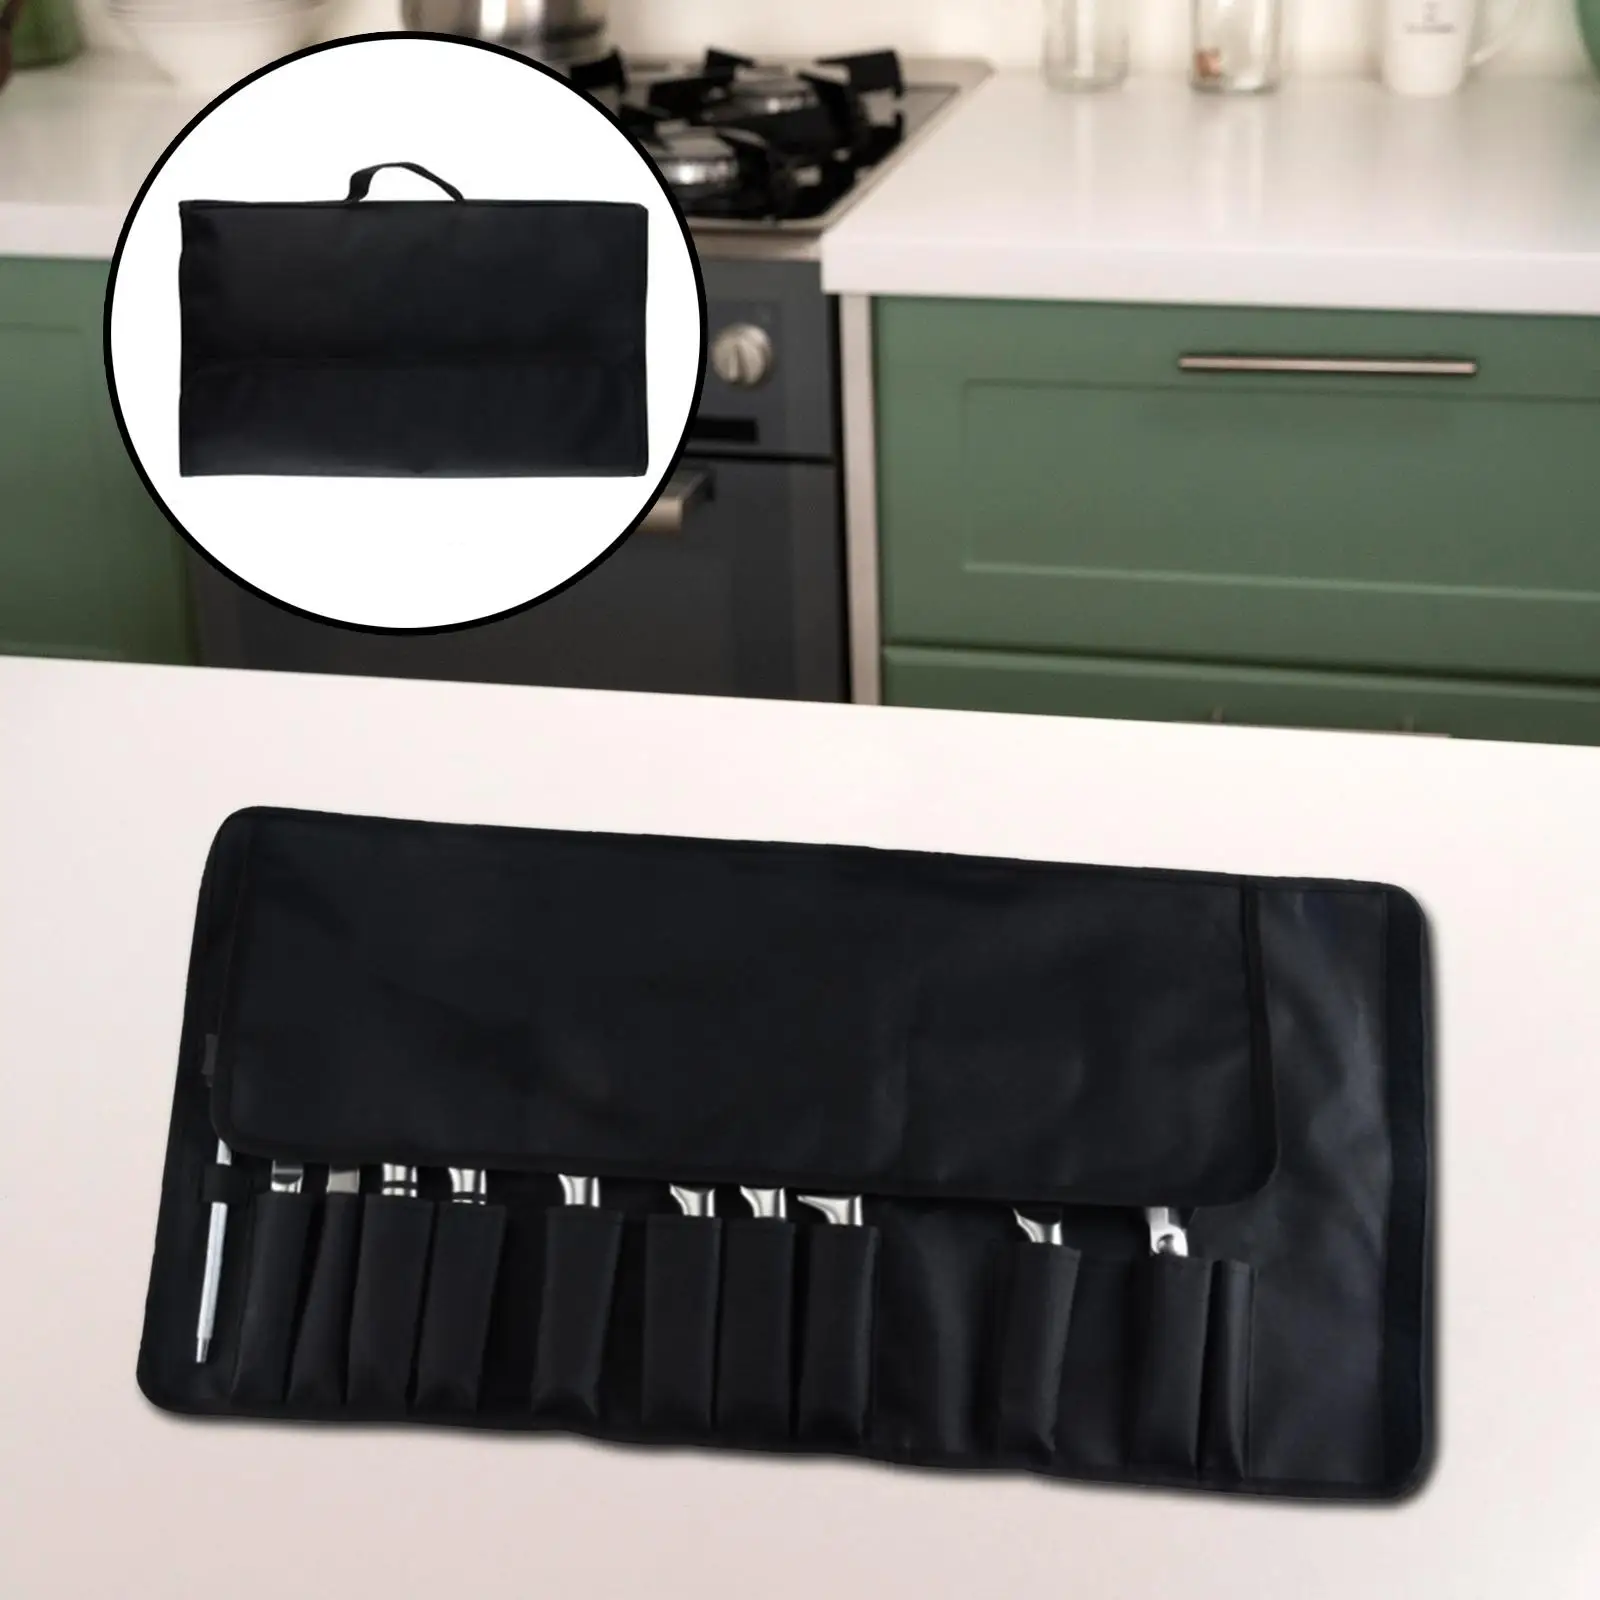 Chef Bag Large Capacity Carry Case Bag 12 Slots Chef Case for Travel Gifts